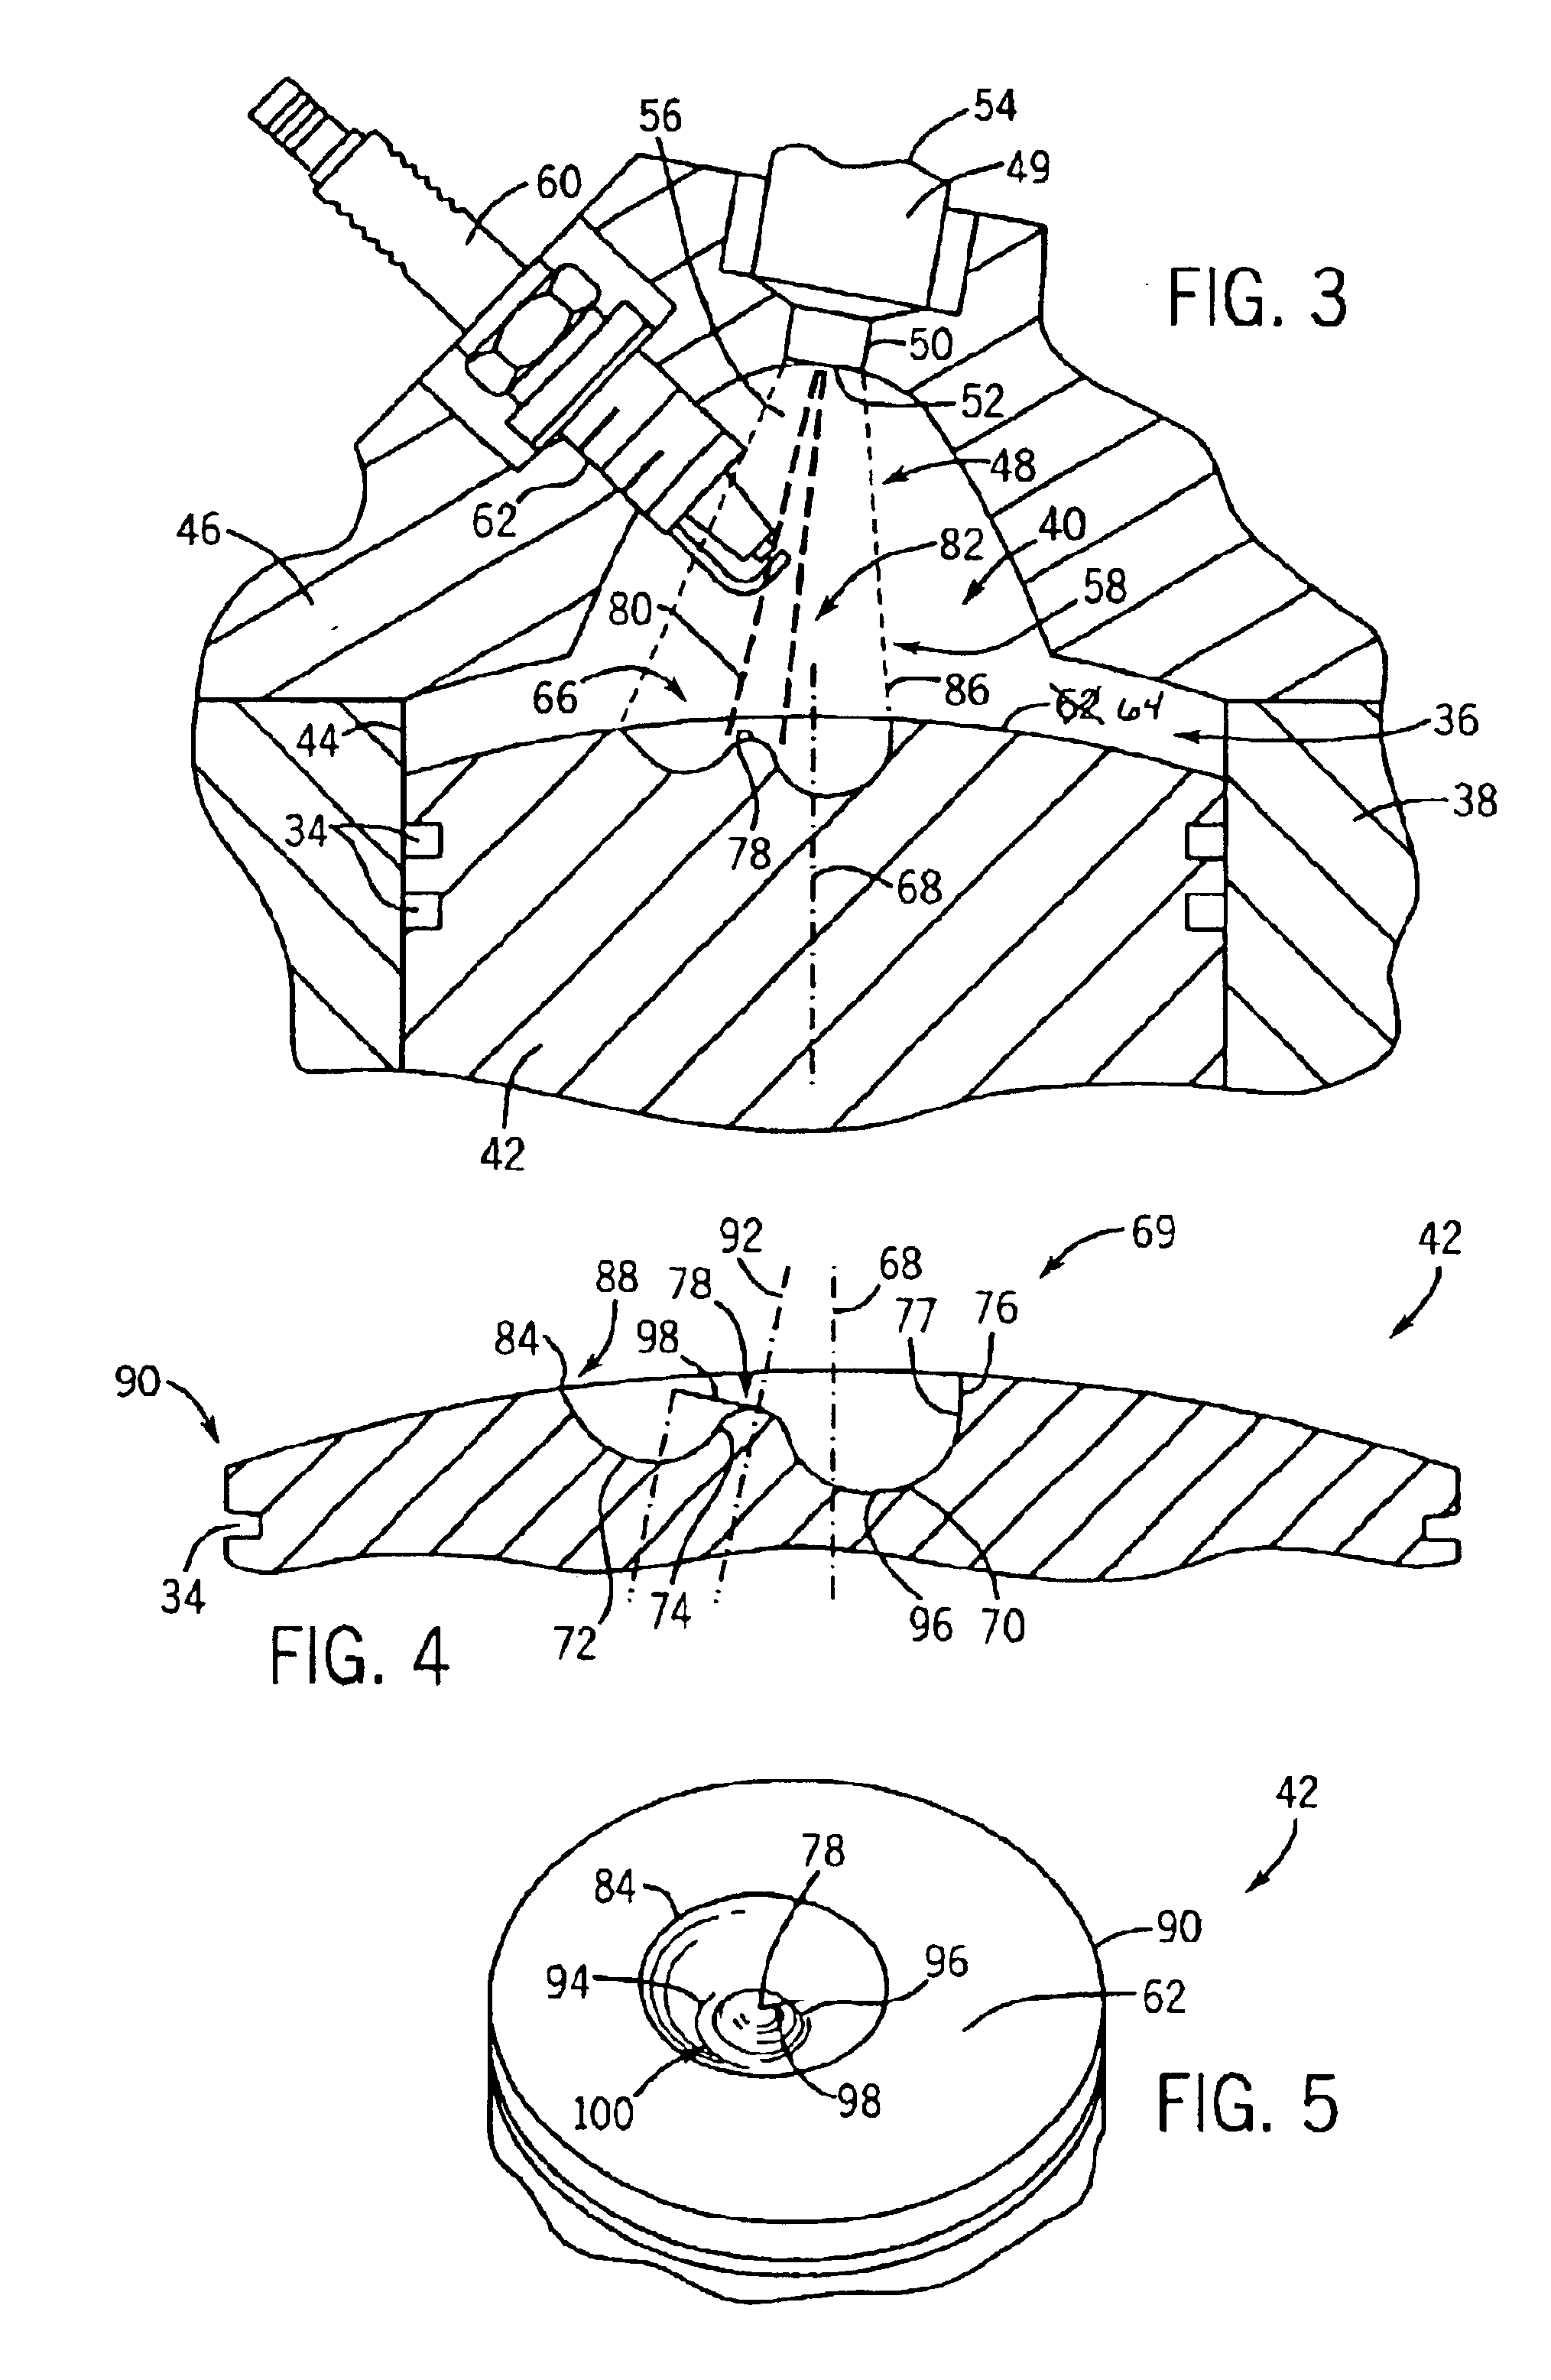 Piston for spark-ignited direct fuel injection engine